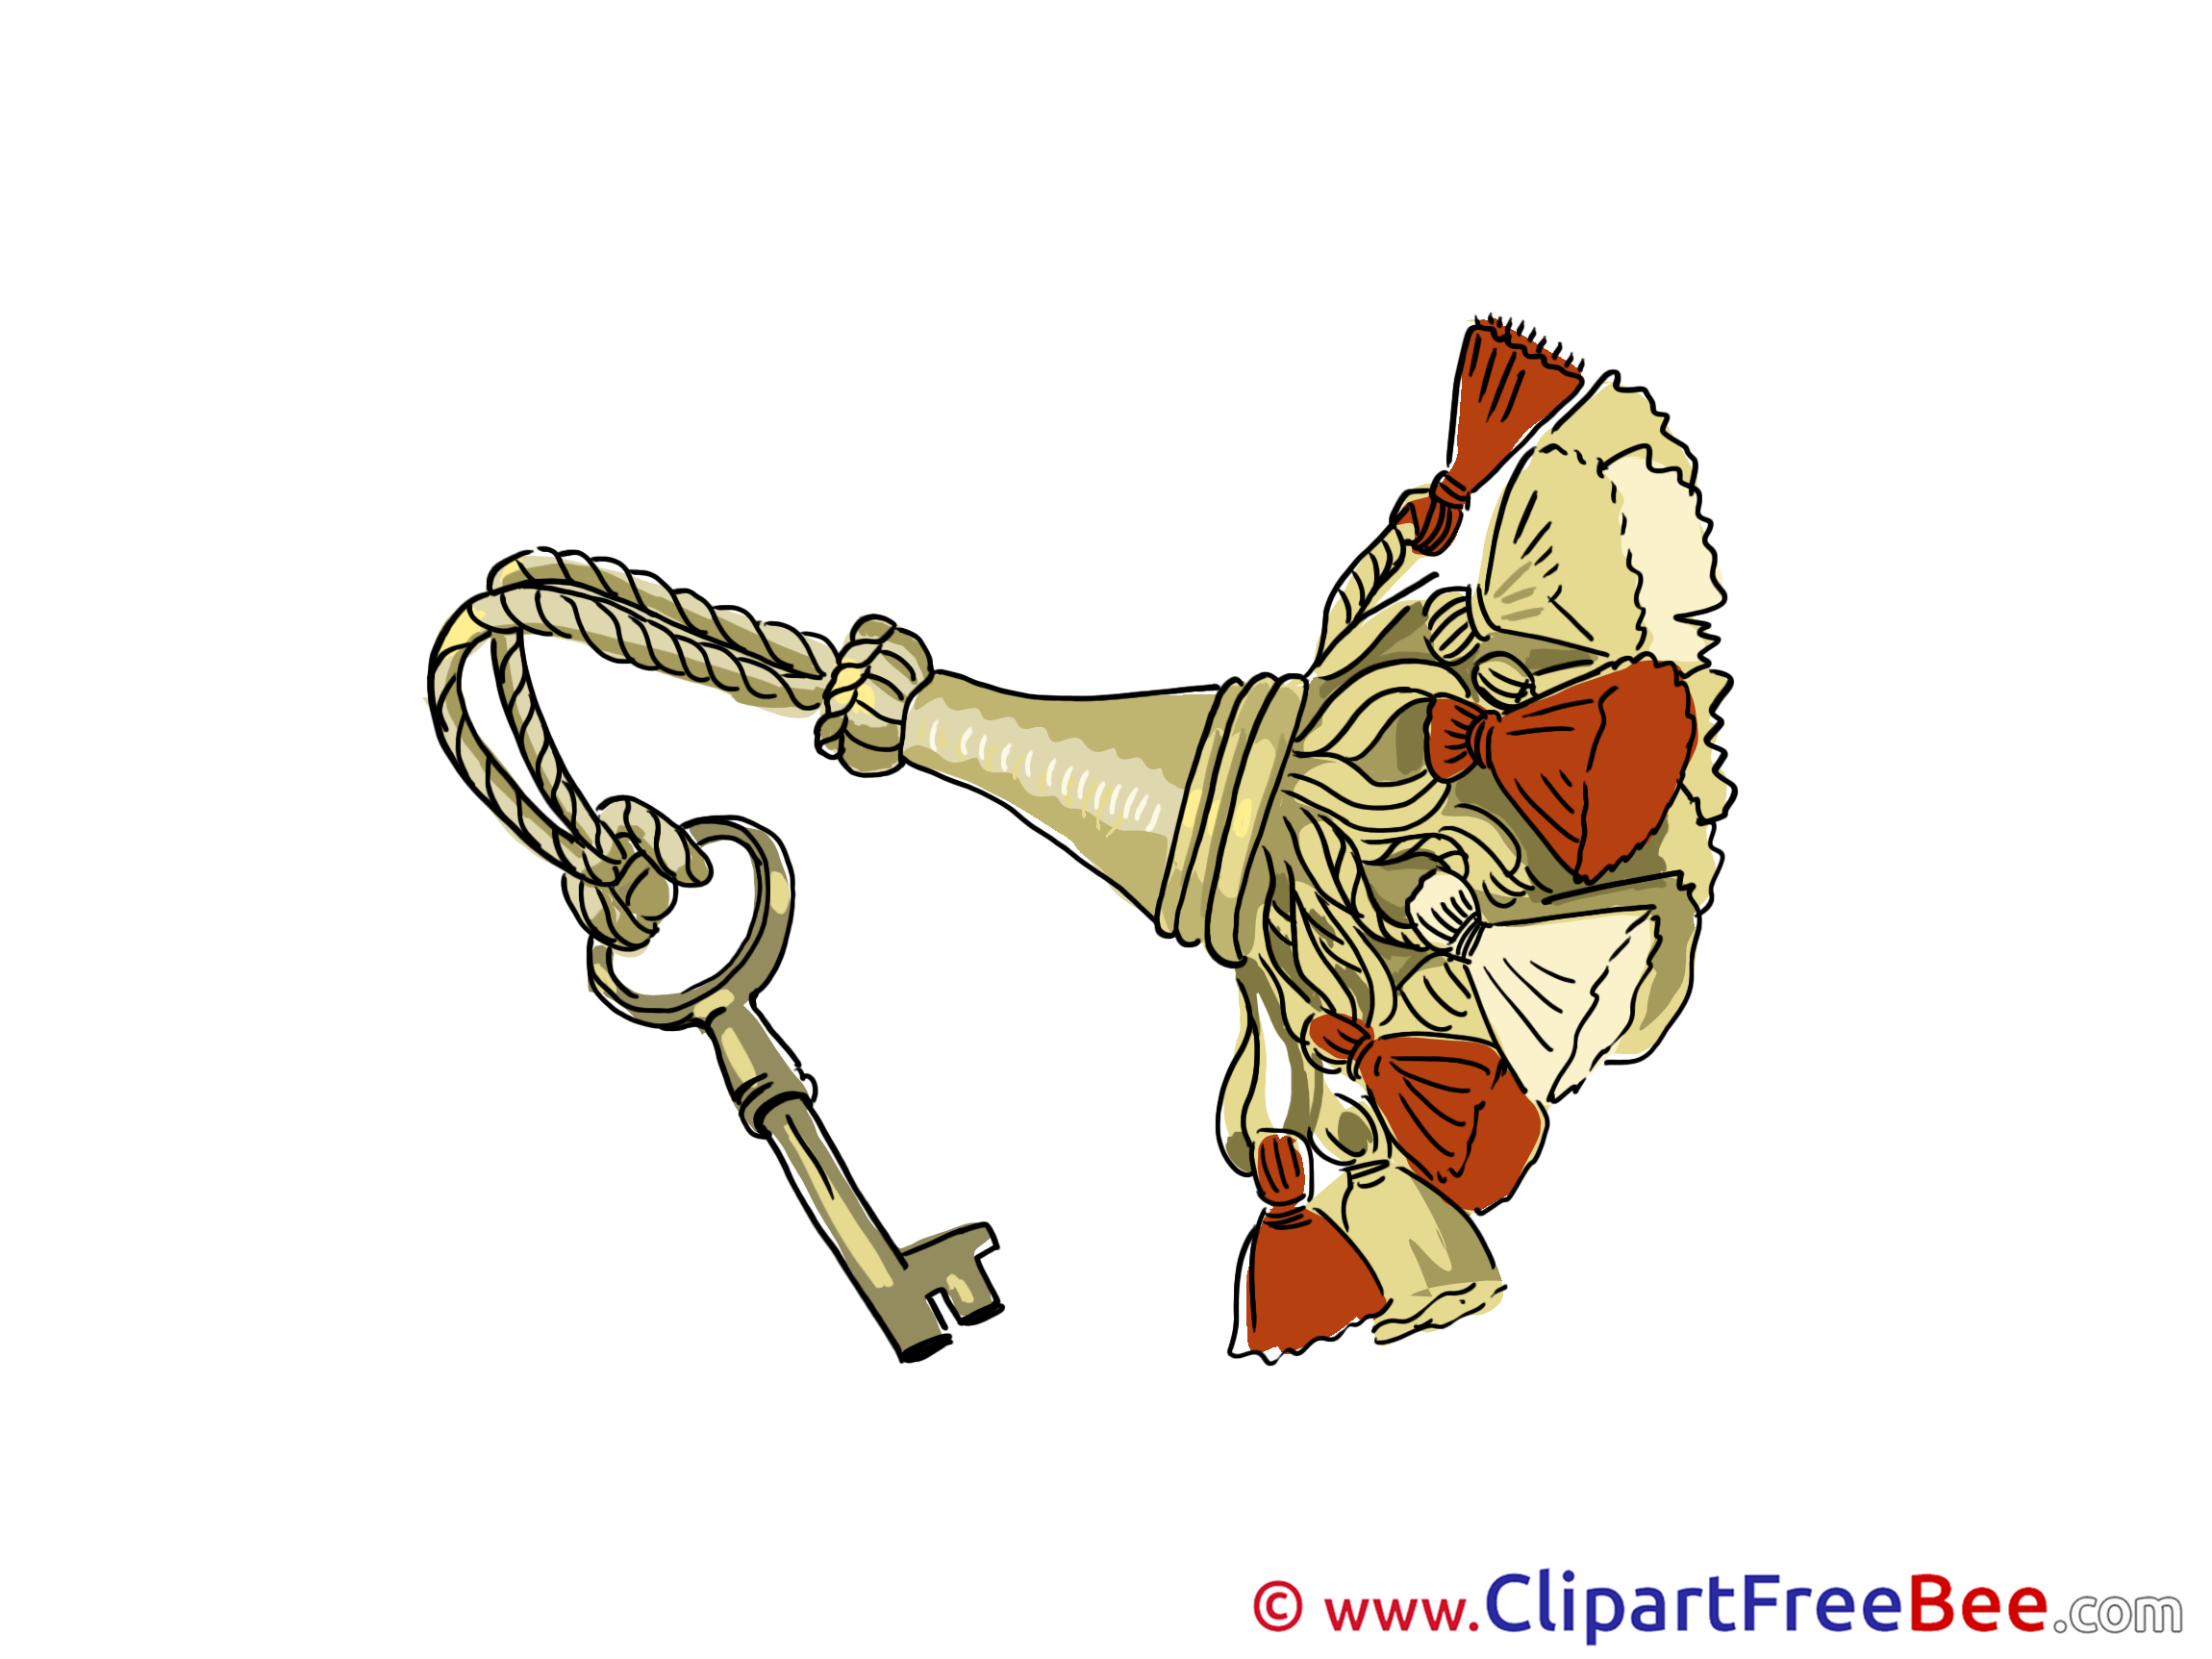 Keychain Art download for free